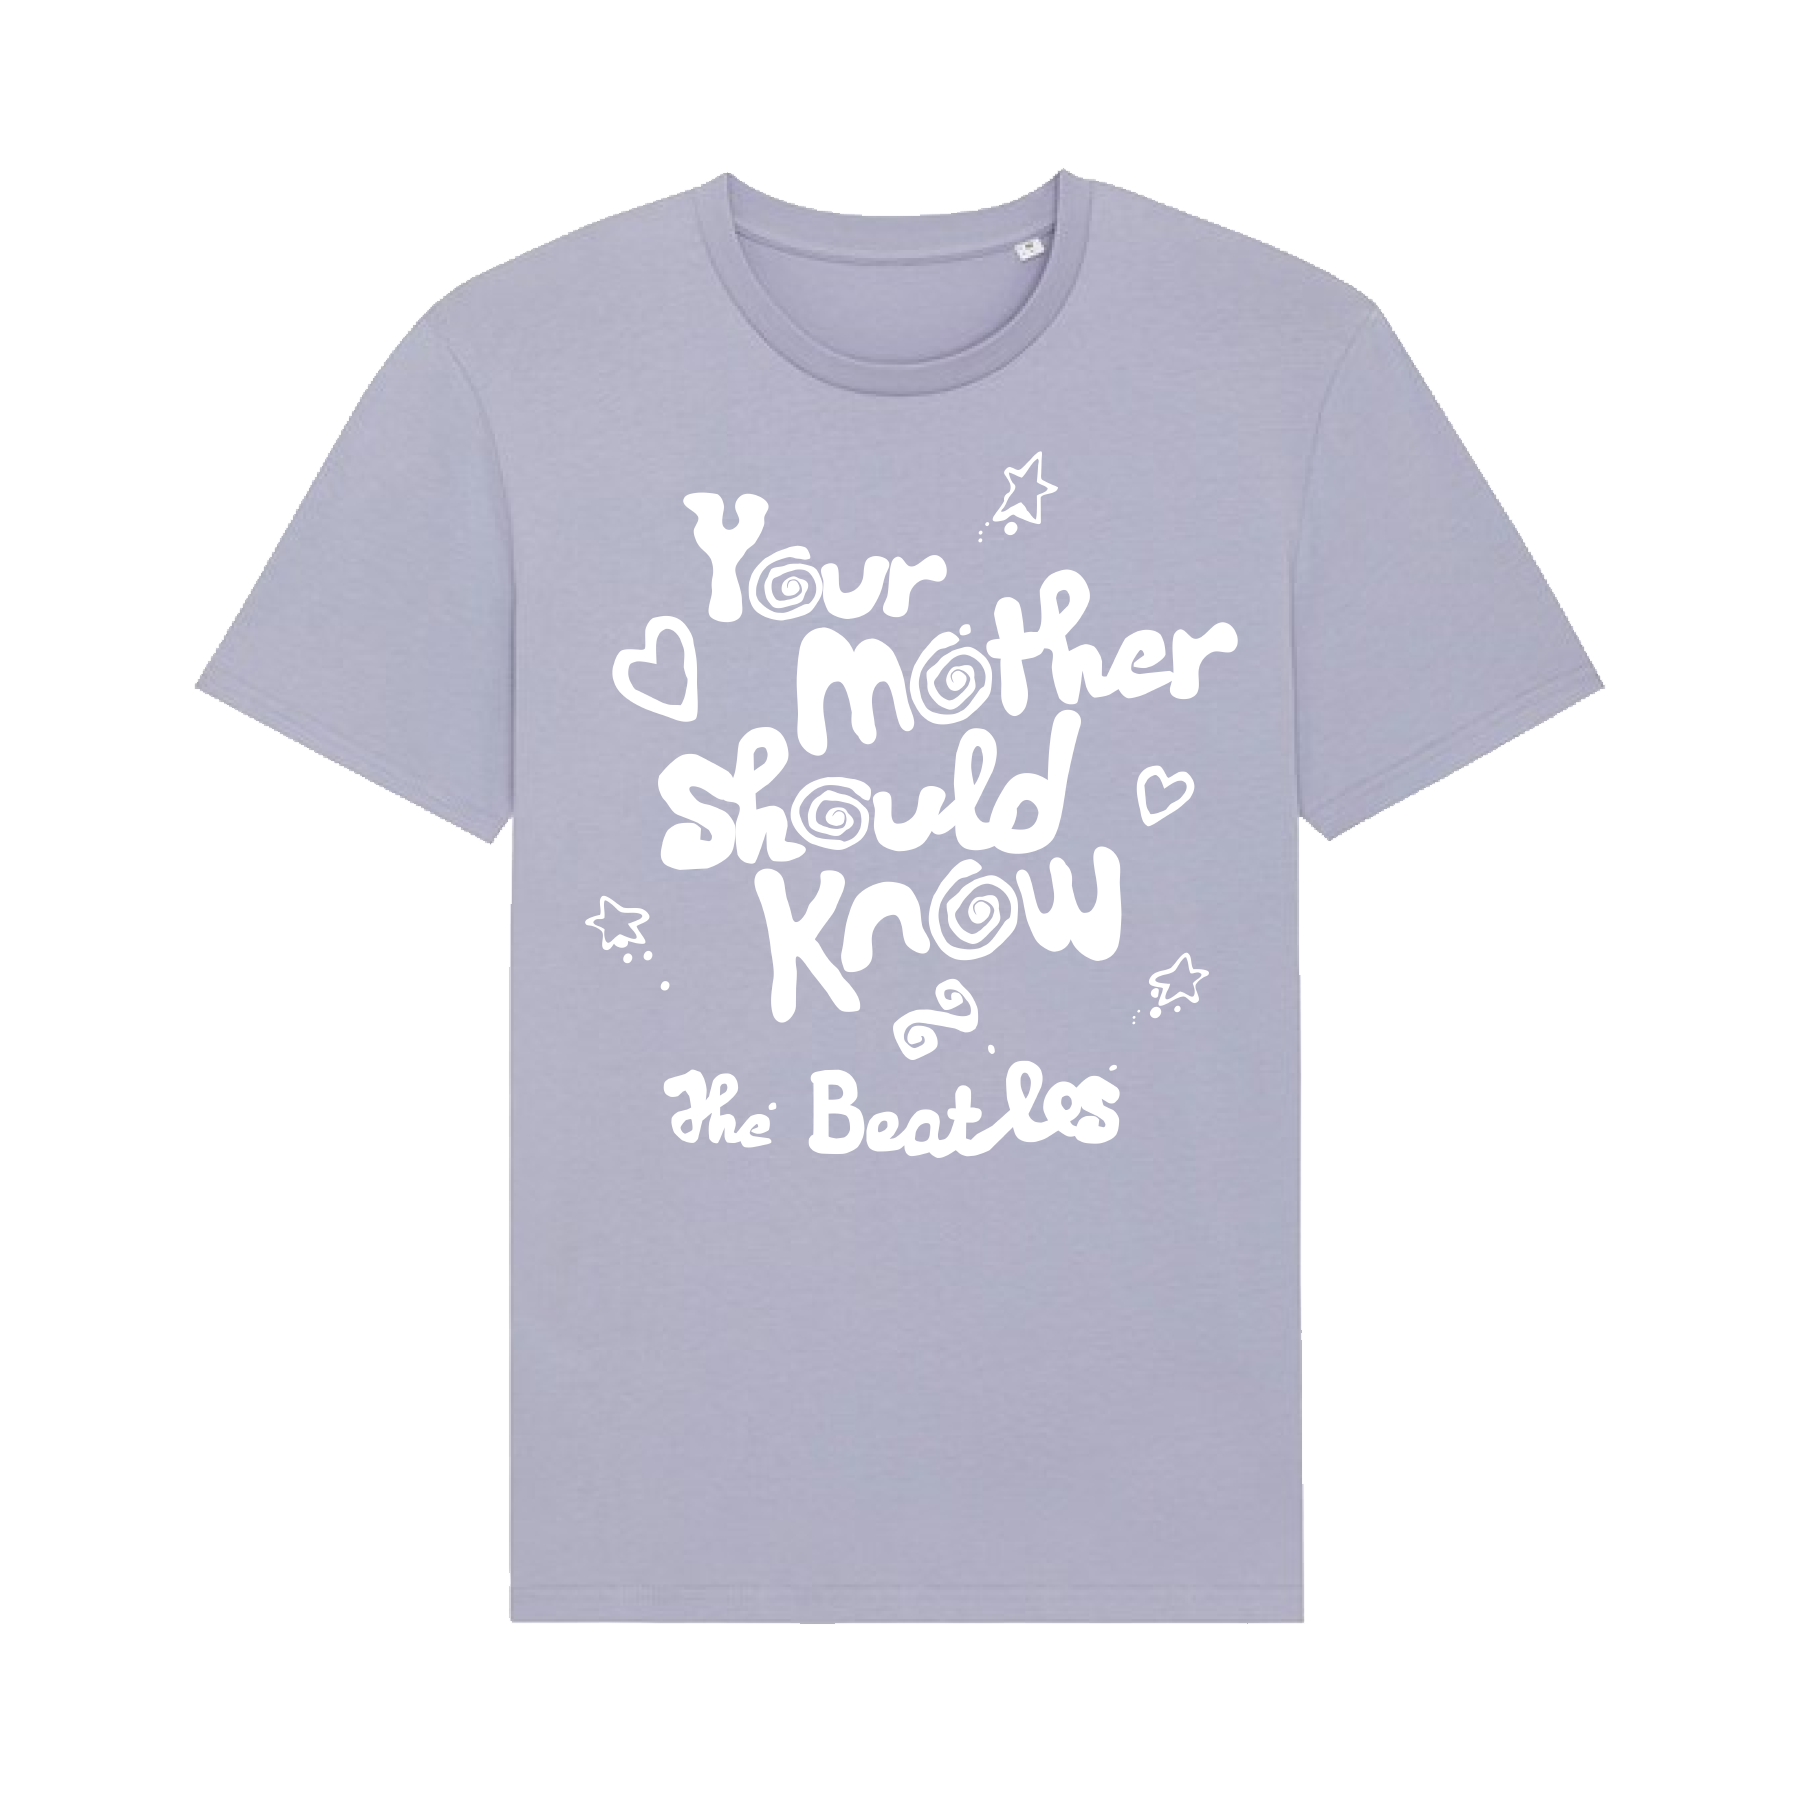 The Beatles - Your Mother Should Know T-Shirt